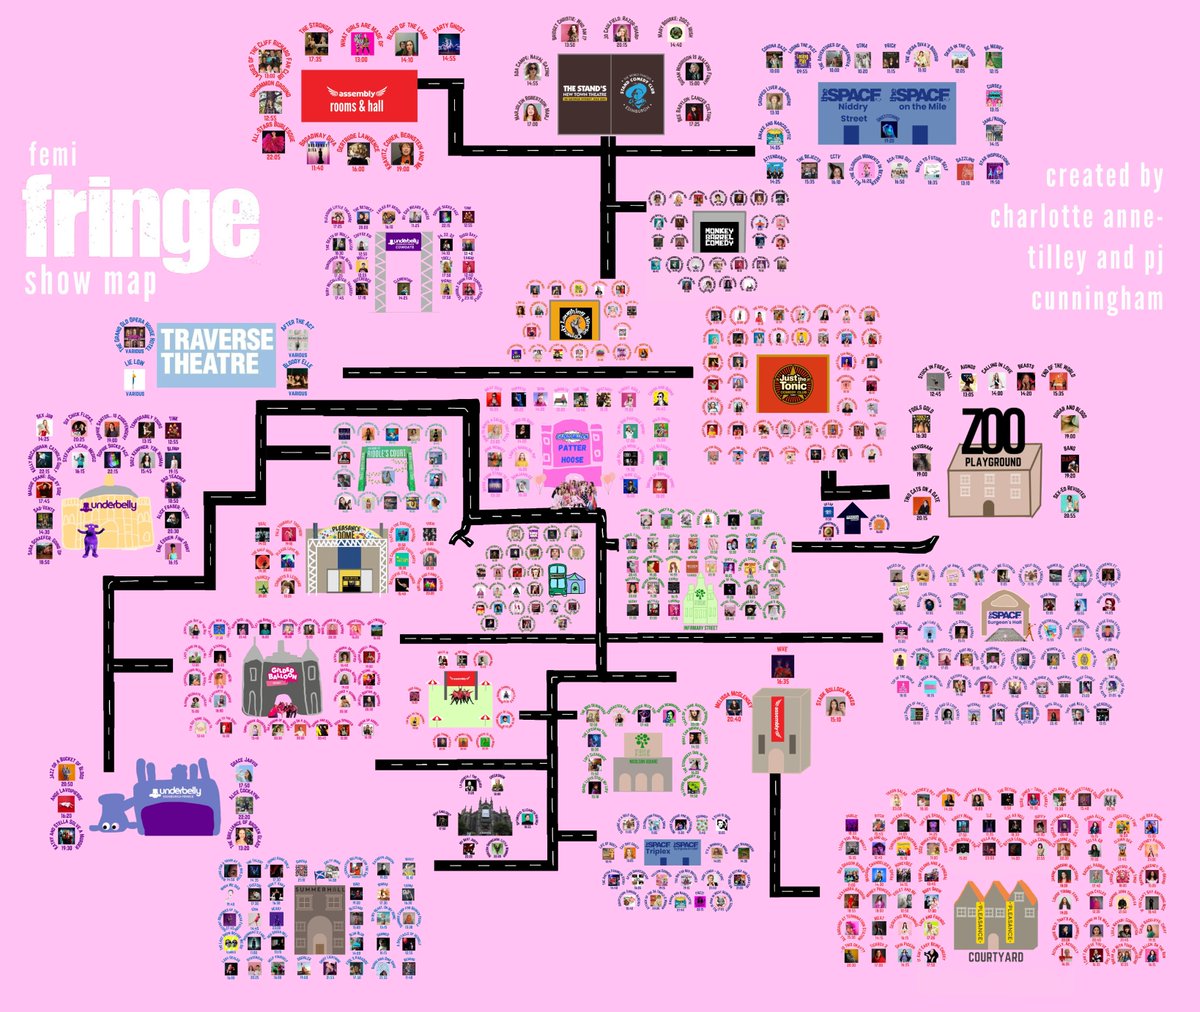 PRESENTING THE 2023 #FEMIFRINGE MAP...

We are so delighted to share the new and improved #femifringe map. Use this handy guide to find incredible female and non-binary talent at #edfringe this year! 

View the high res version here: tinyurl.com/2ctsnhdw